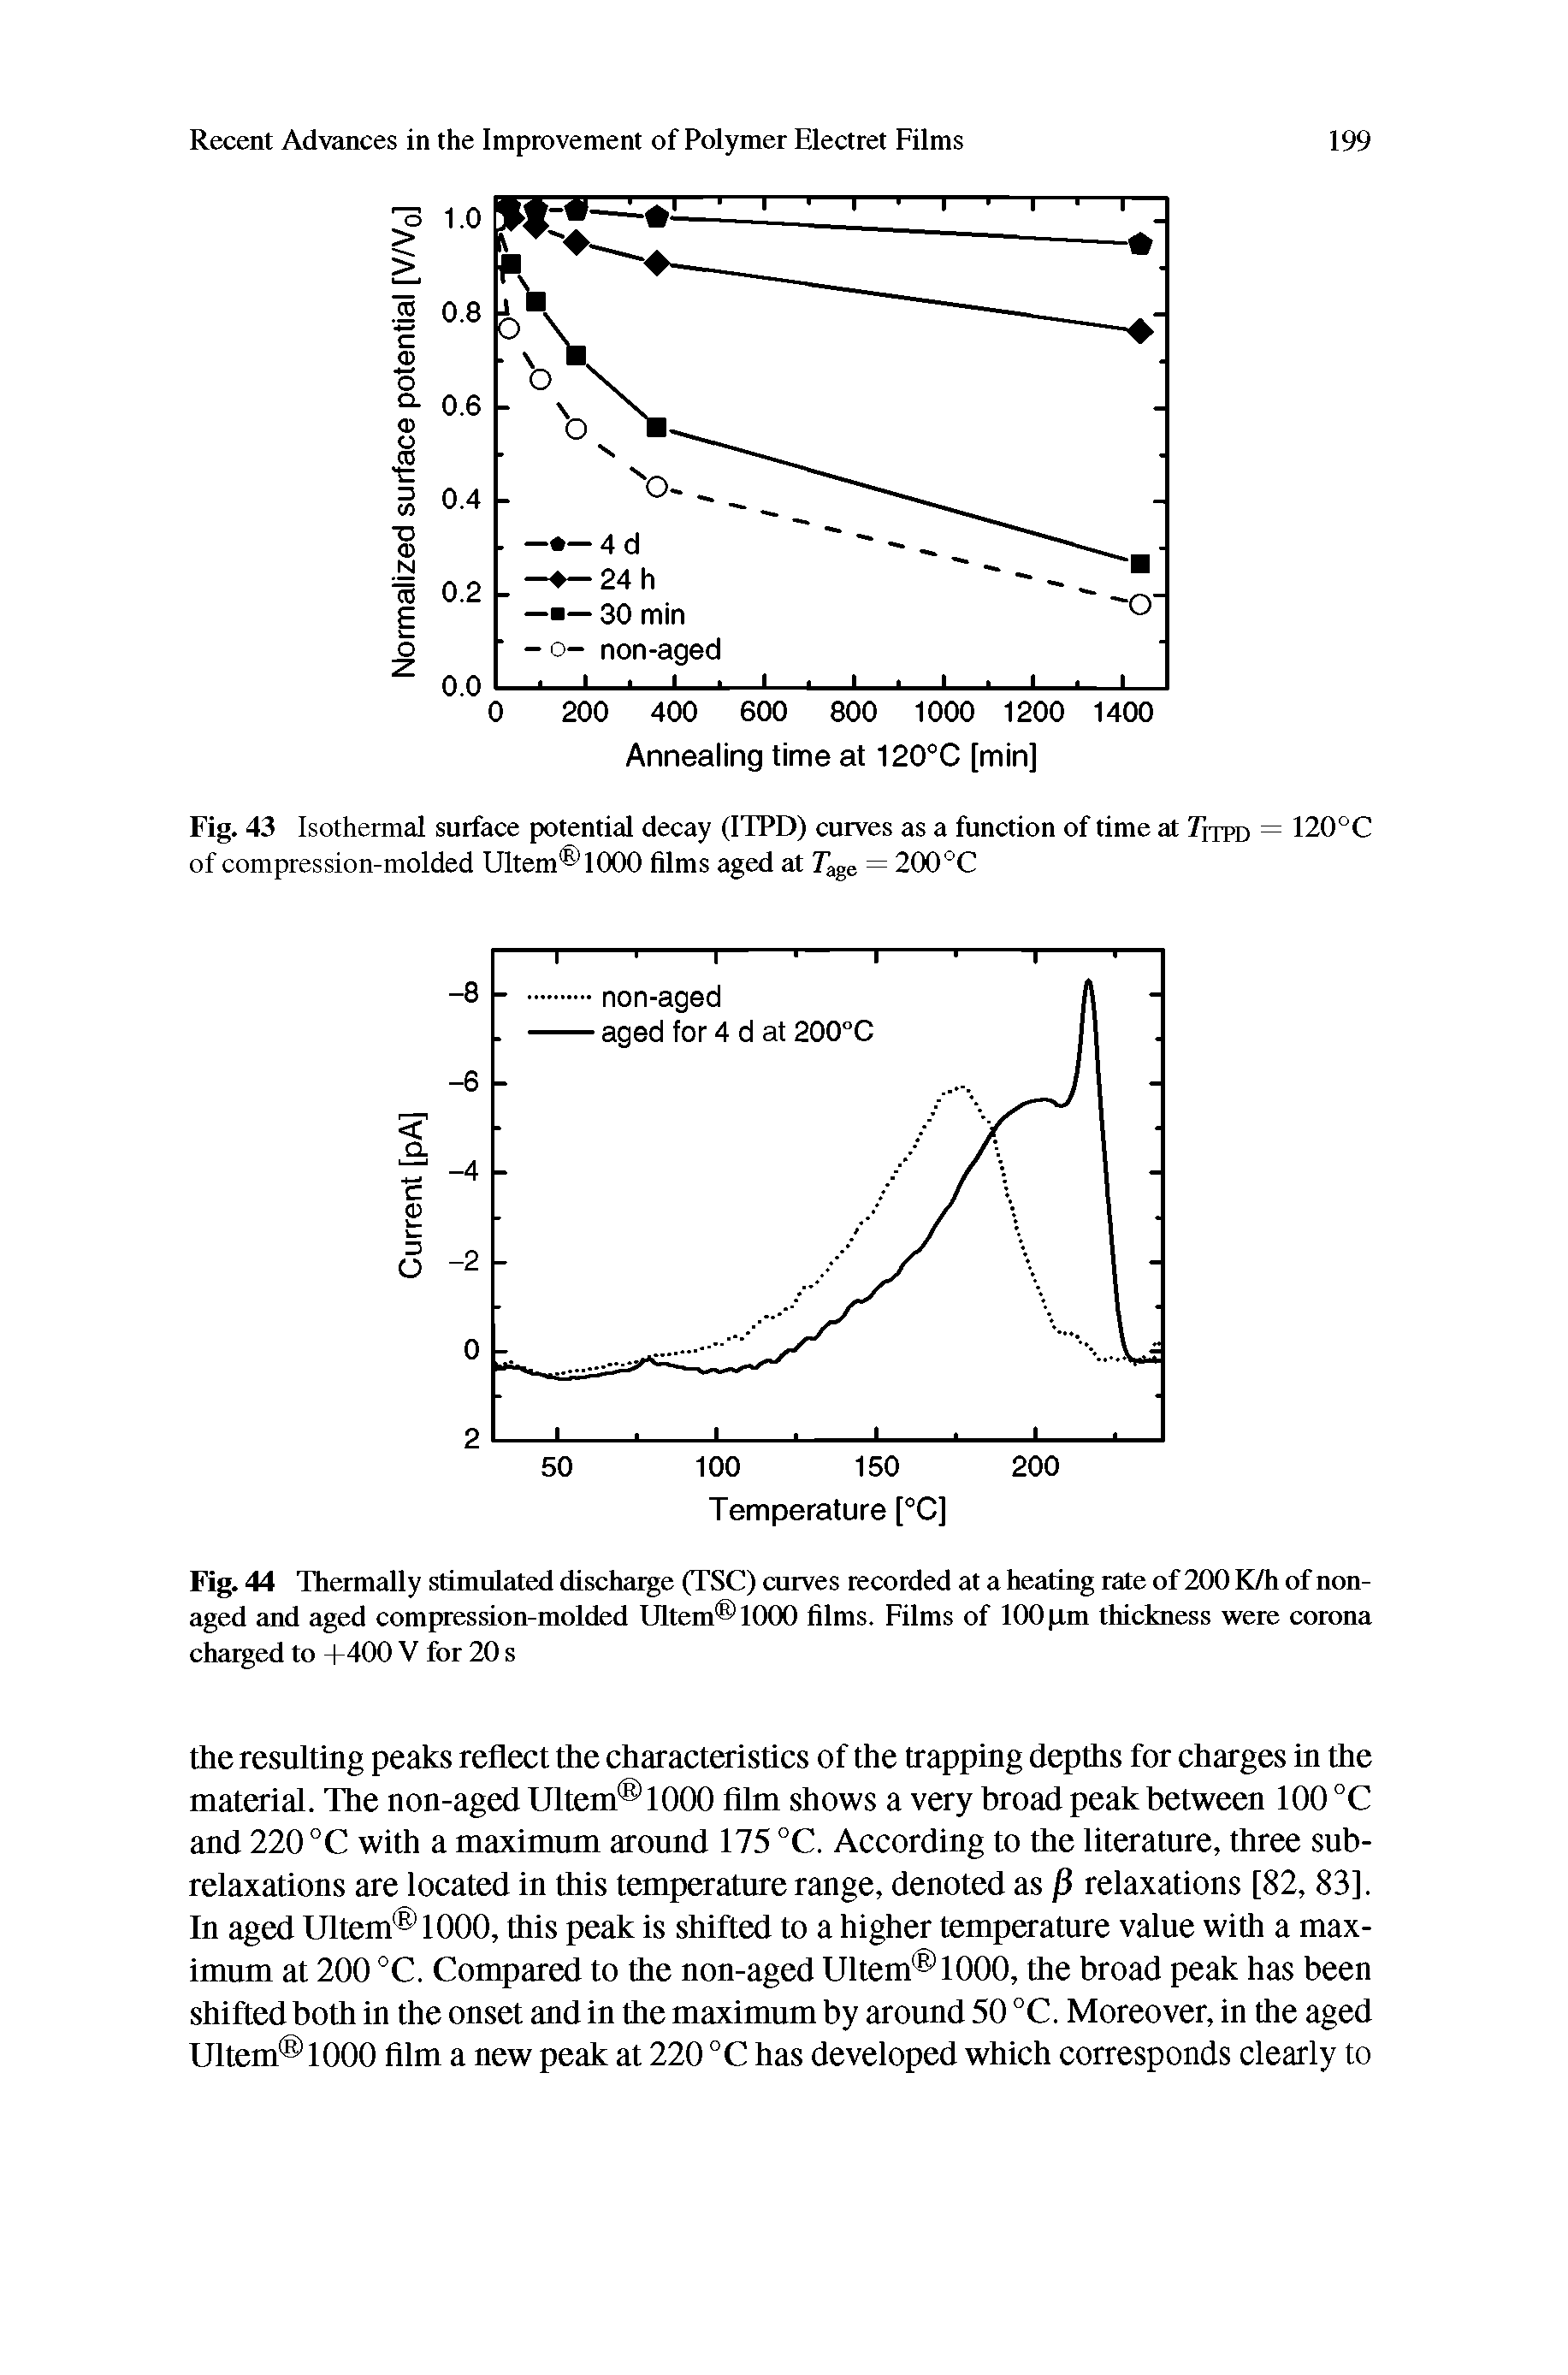 Fig. 43 Isothermal surface potential decay (ITPD) curves as a function of time at Tywn = 120°C of compression-molded Ultem 1000 films aged at rage = 200°C...